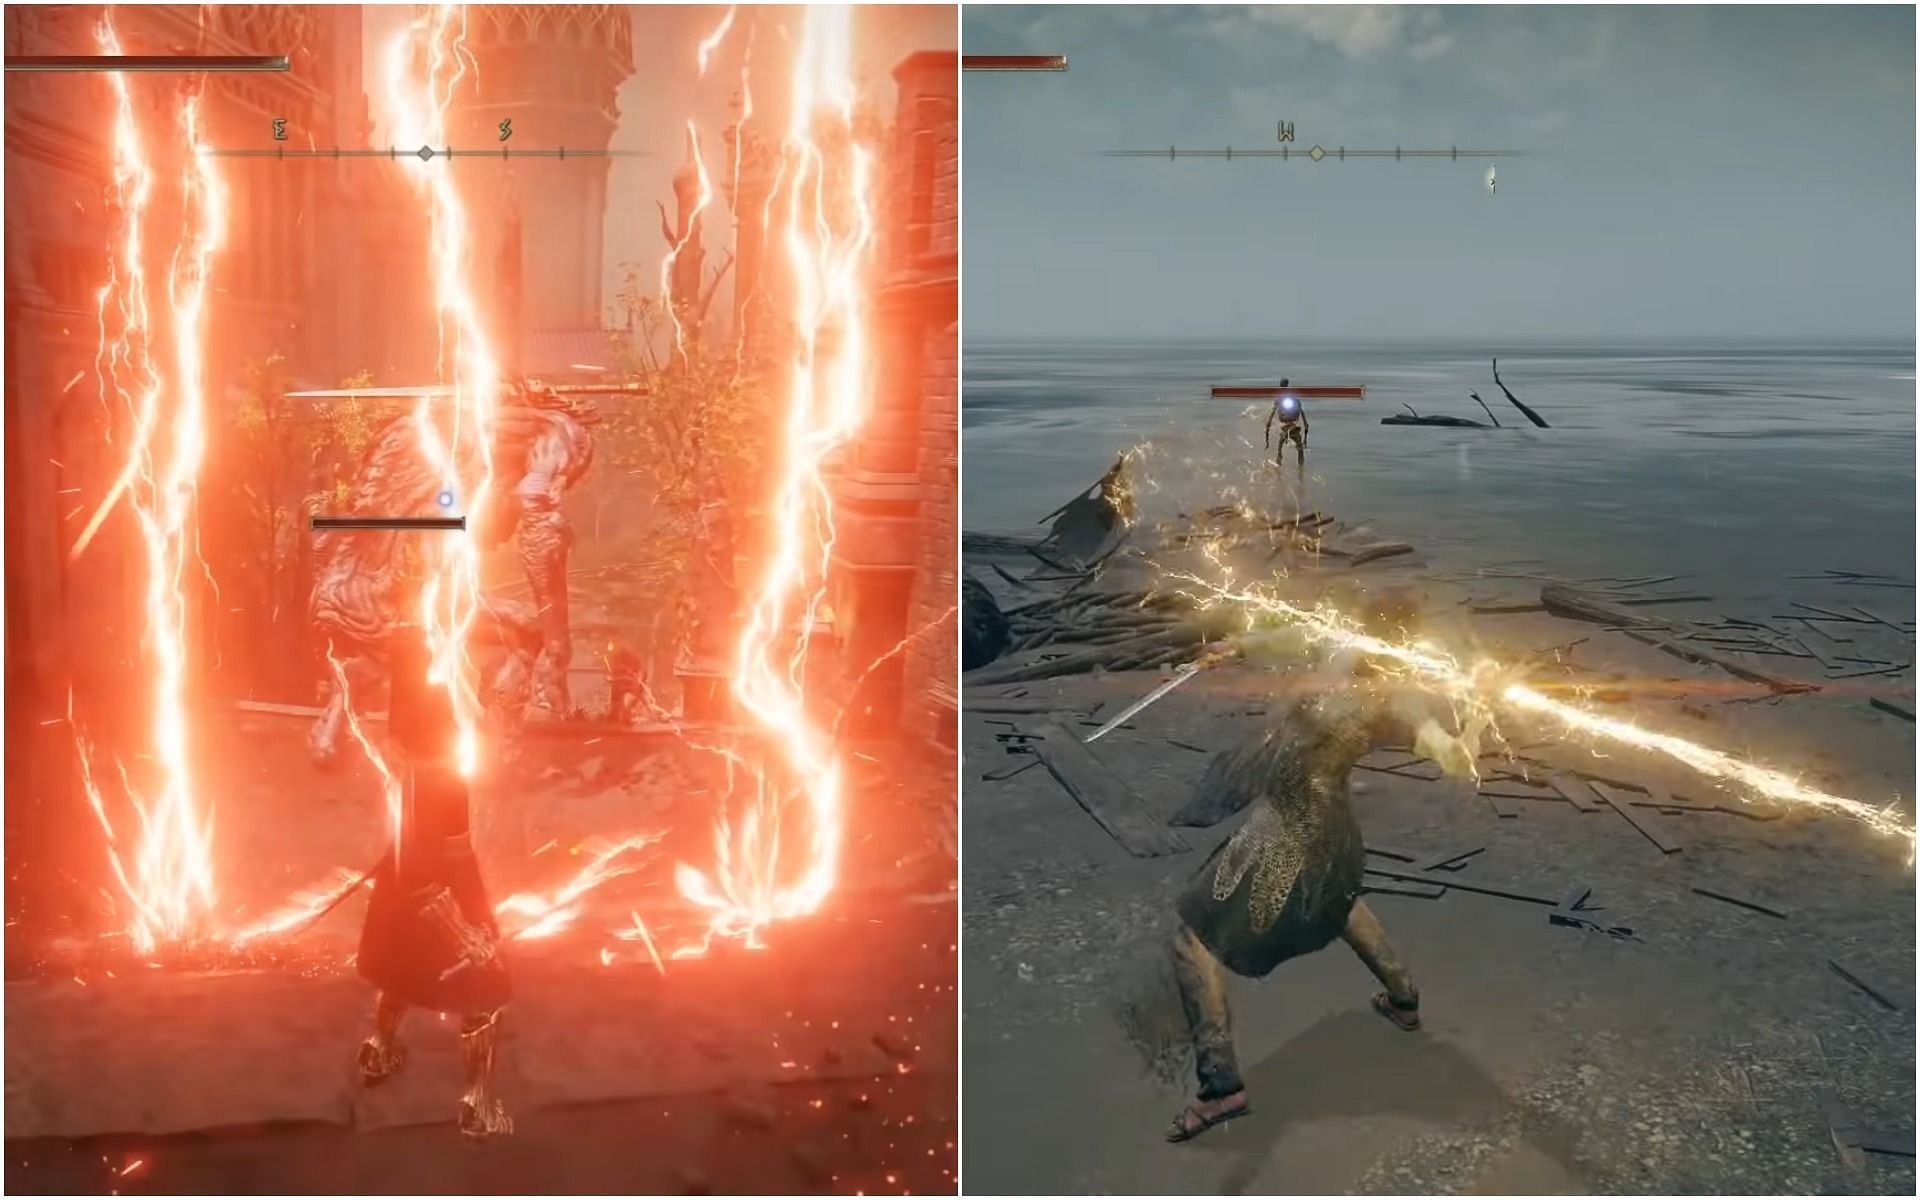 Every overpowered incantation is worth chasing in Elden Ring (Image via RageGamingVideos/Youtube and Kibbles/Youtube)